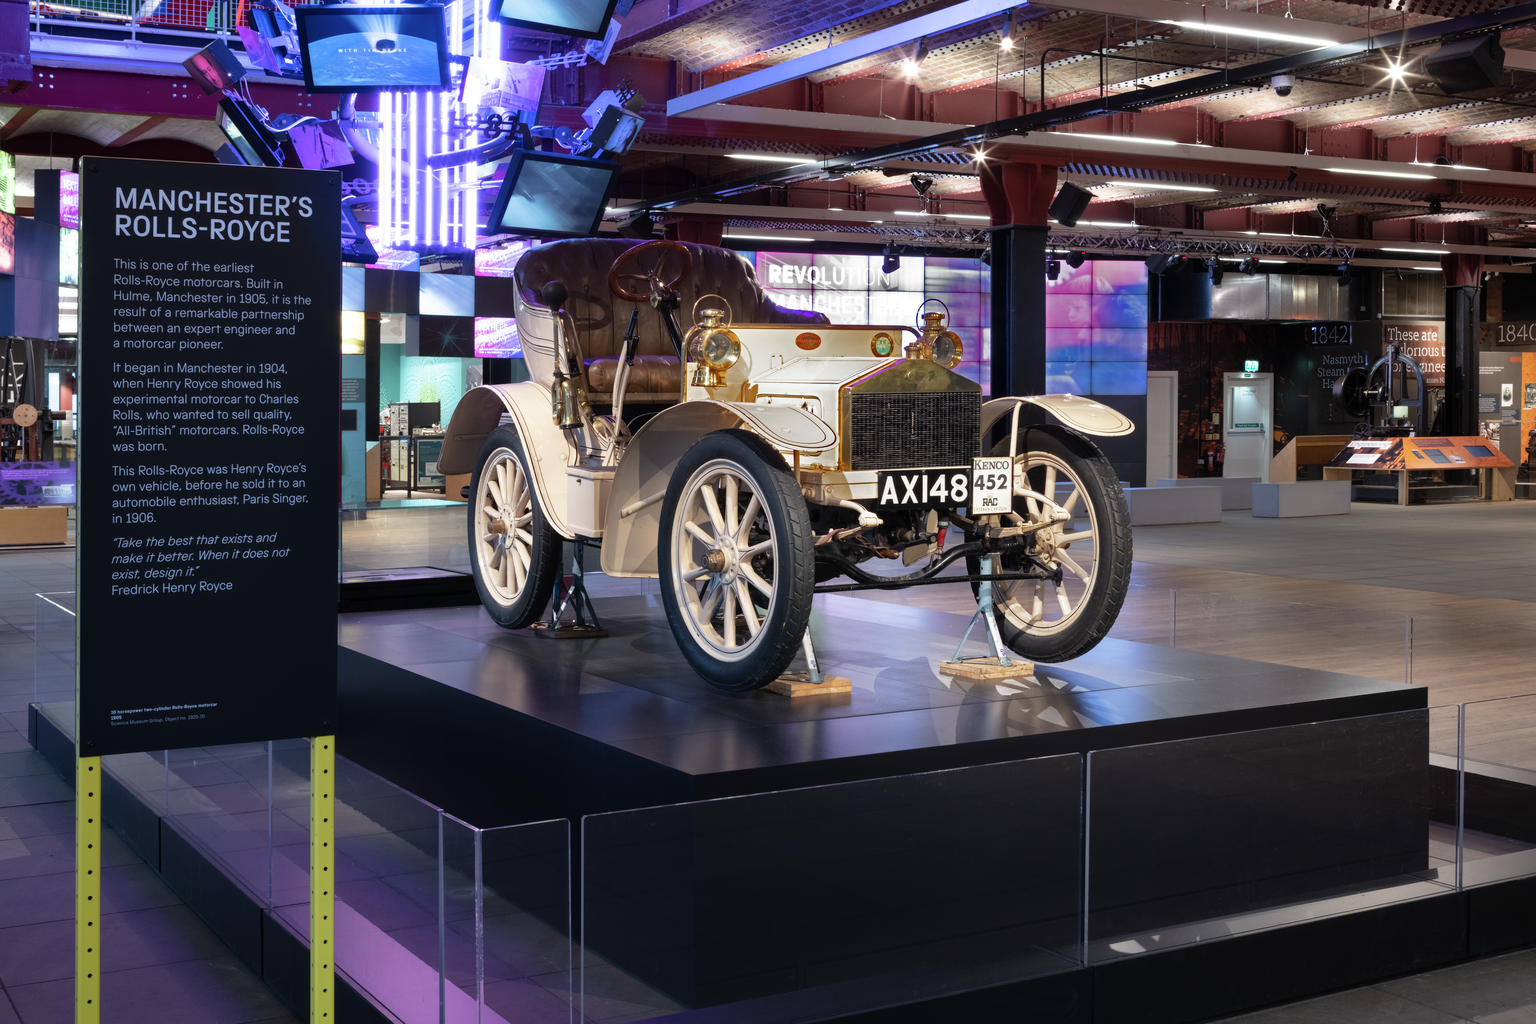 The Rolls-Royce on display in the Revolution Manchester gallery